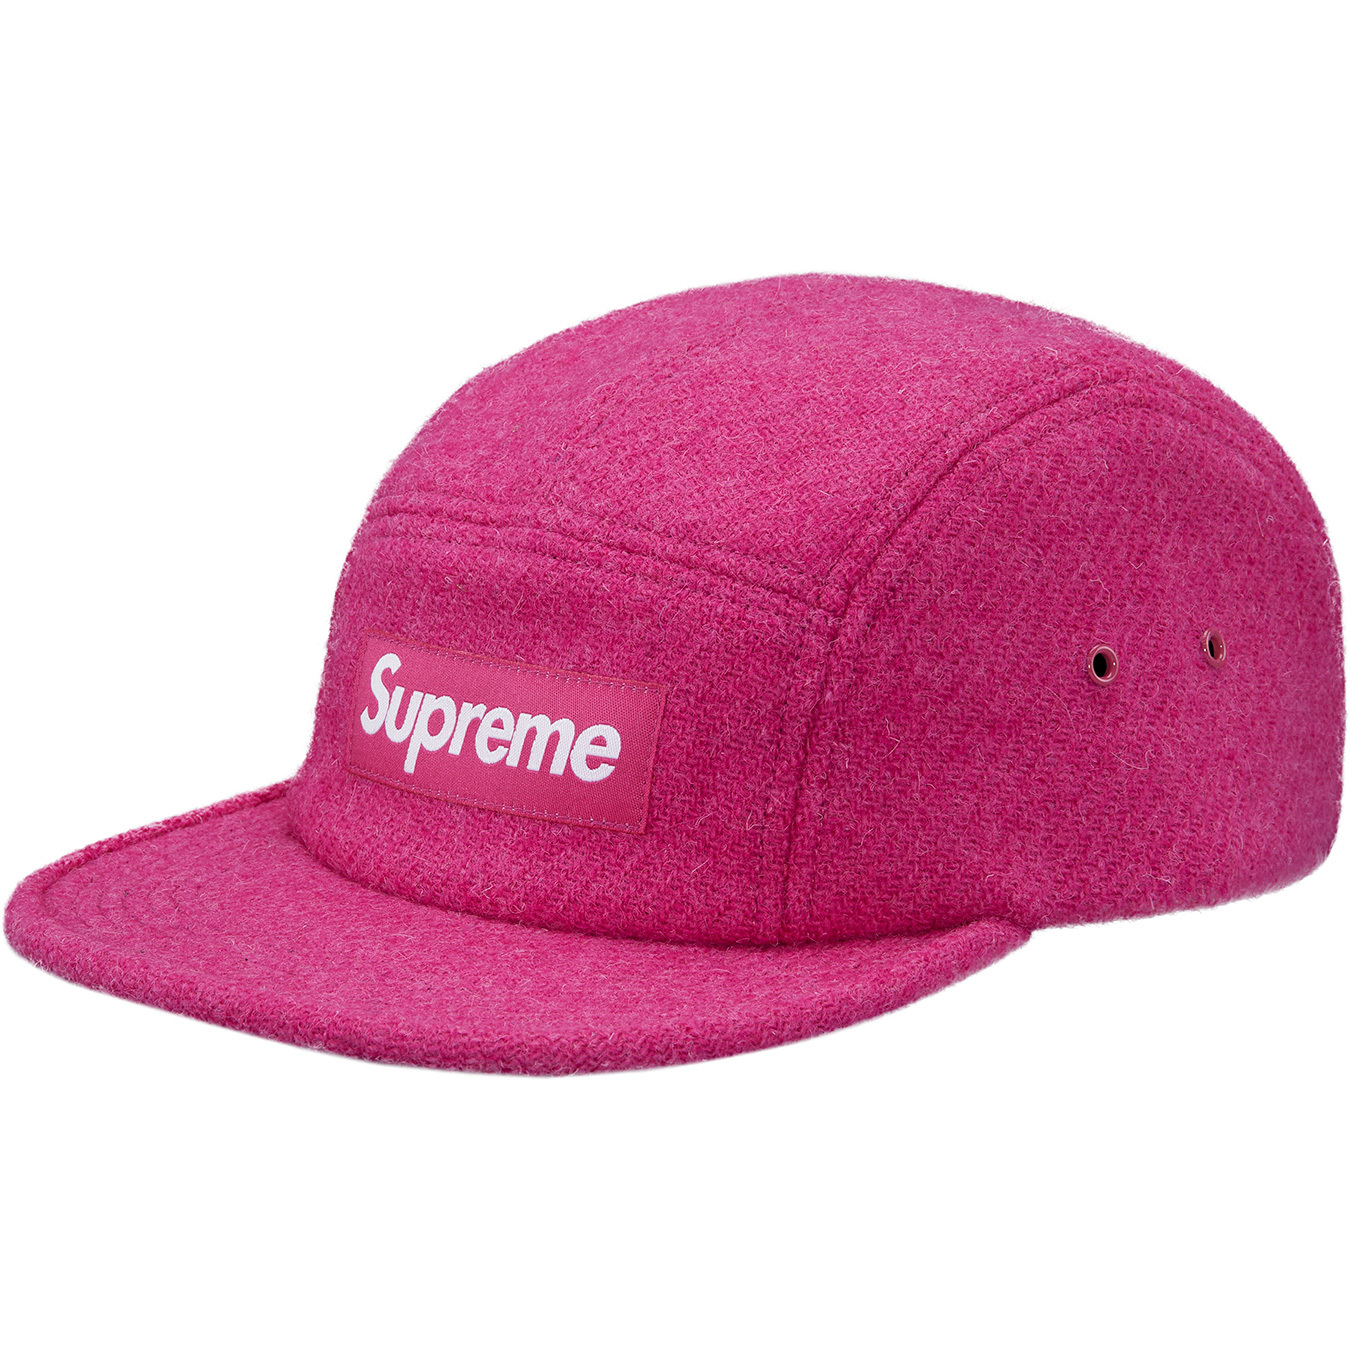 Supreme Featherweight Wool Camp Cap (FW17) Pink - FW17 - IT